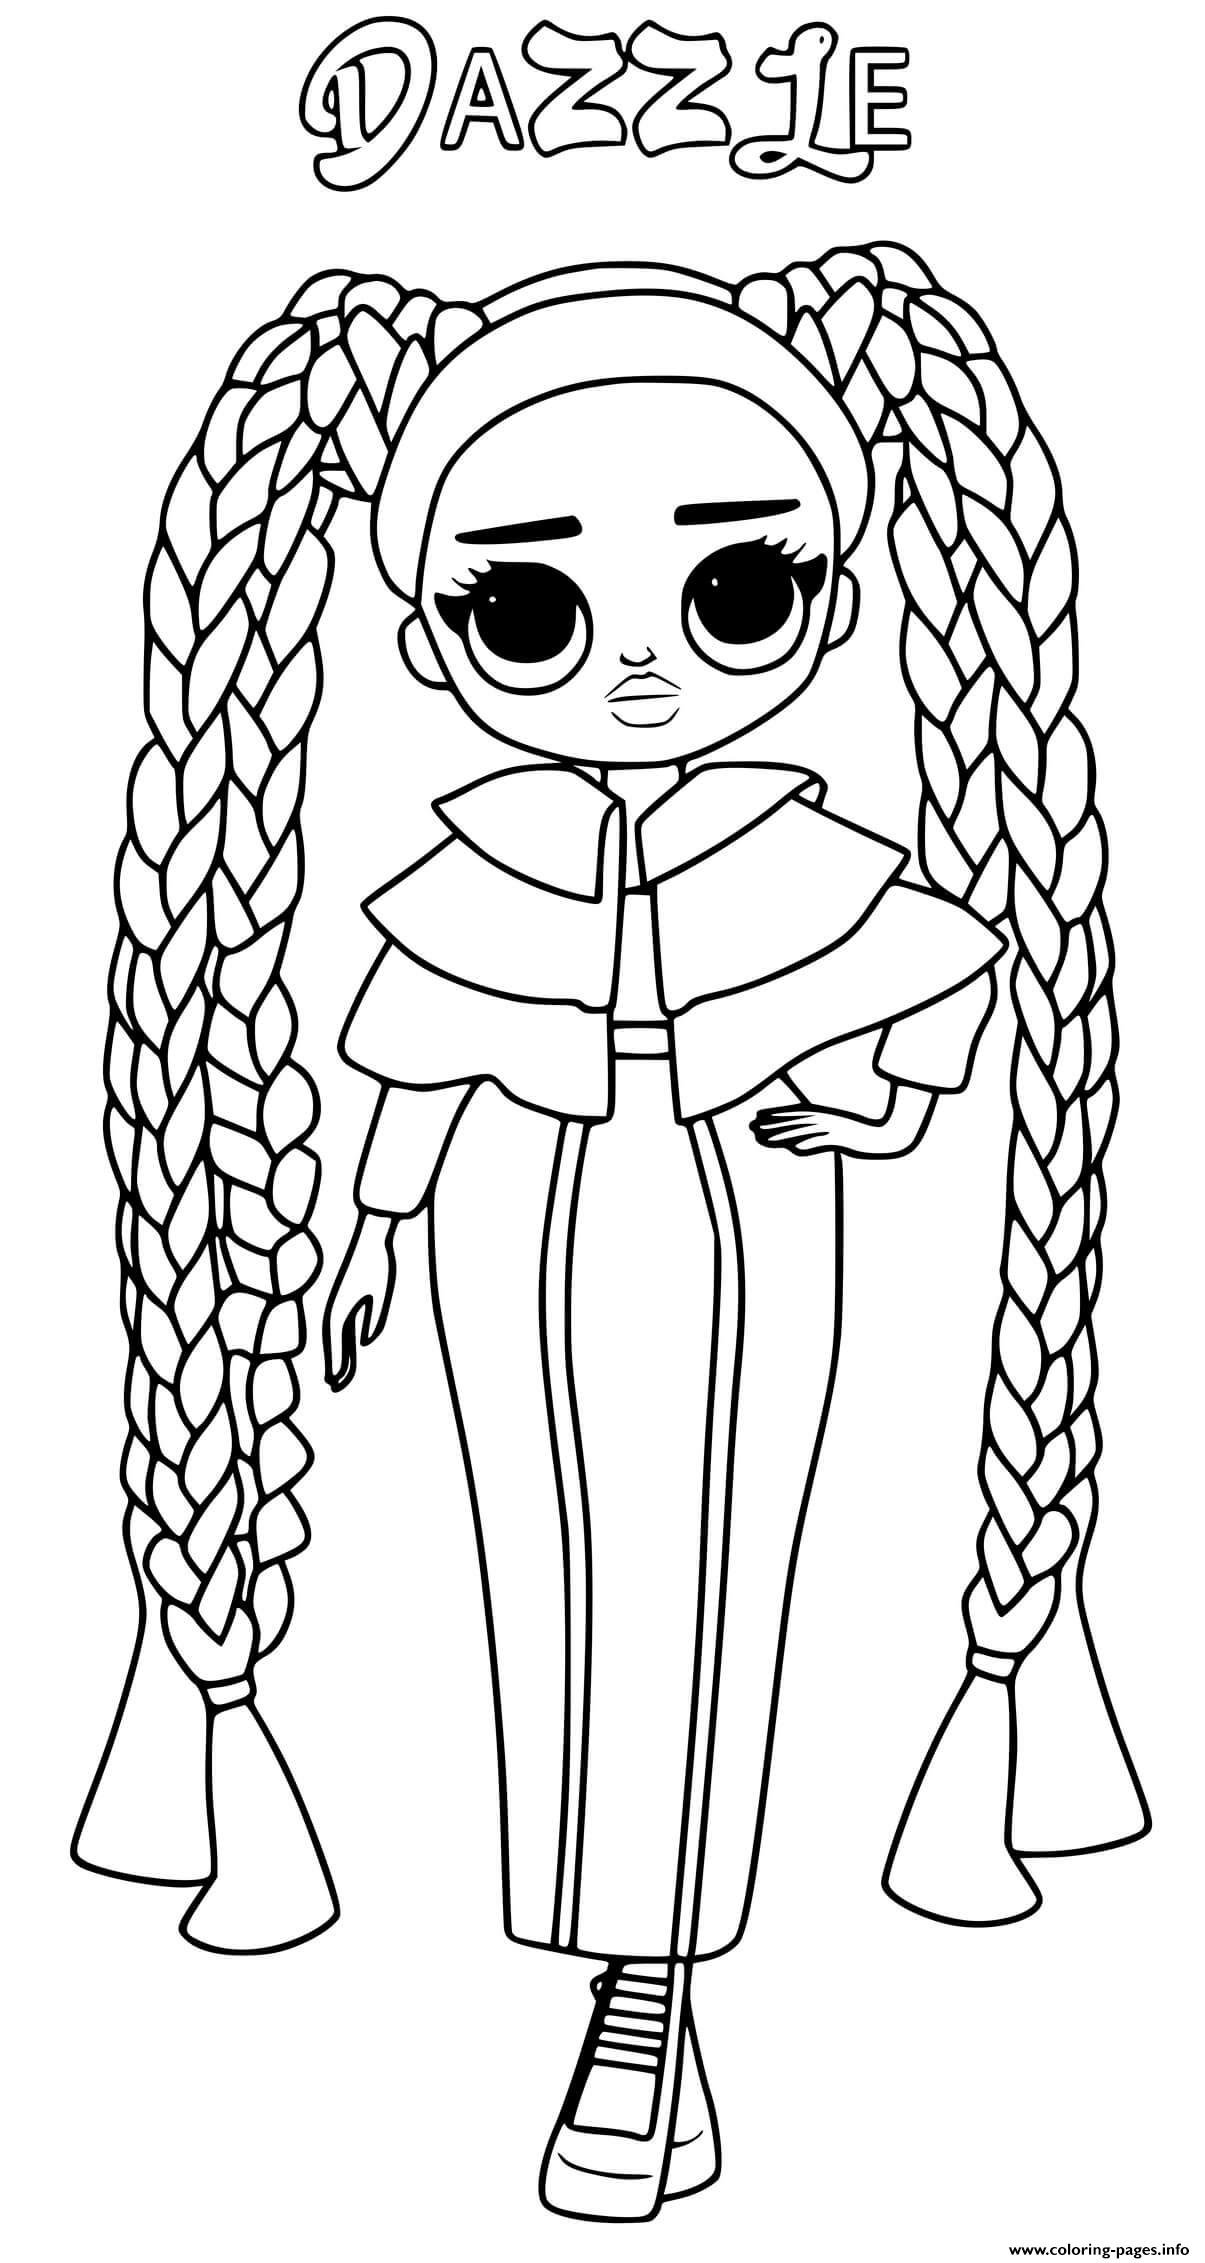 Dazzle Lol Omg Coloring Pages Printable